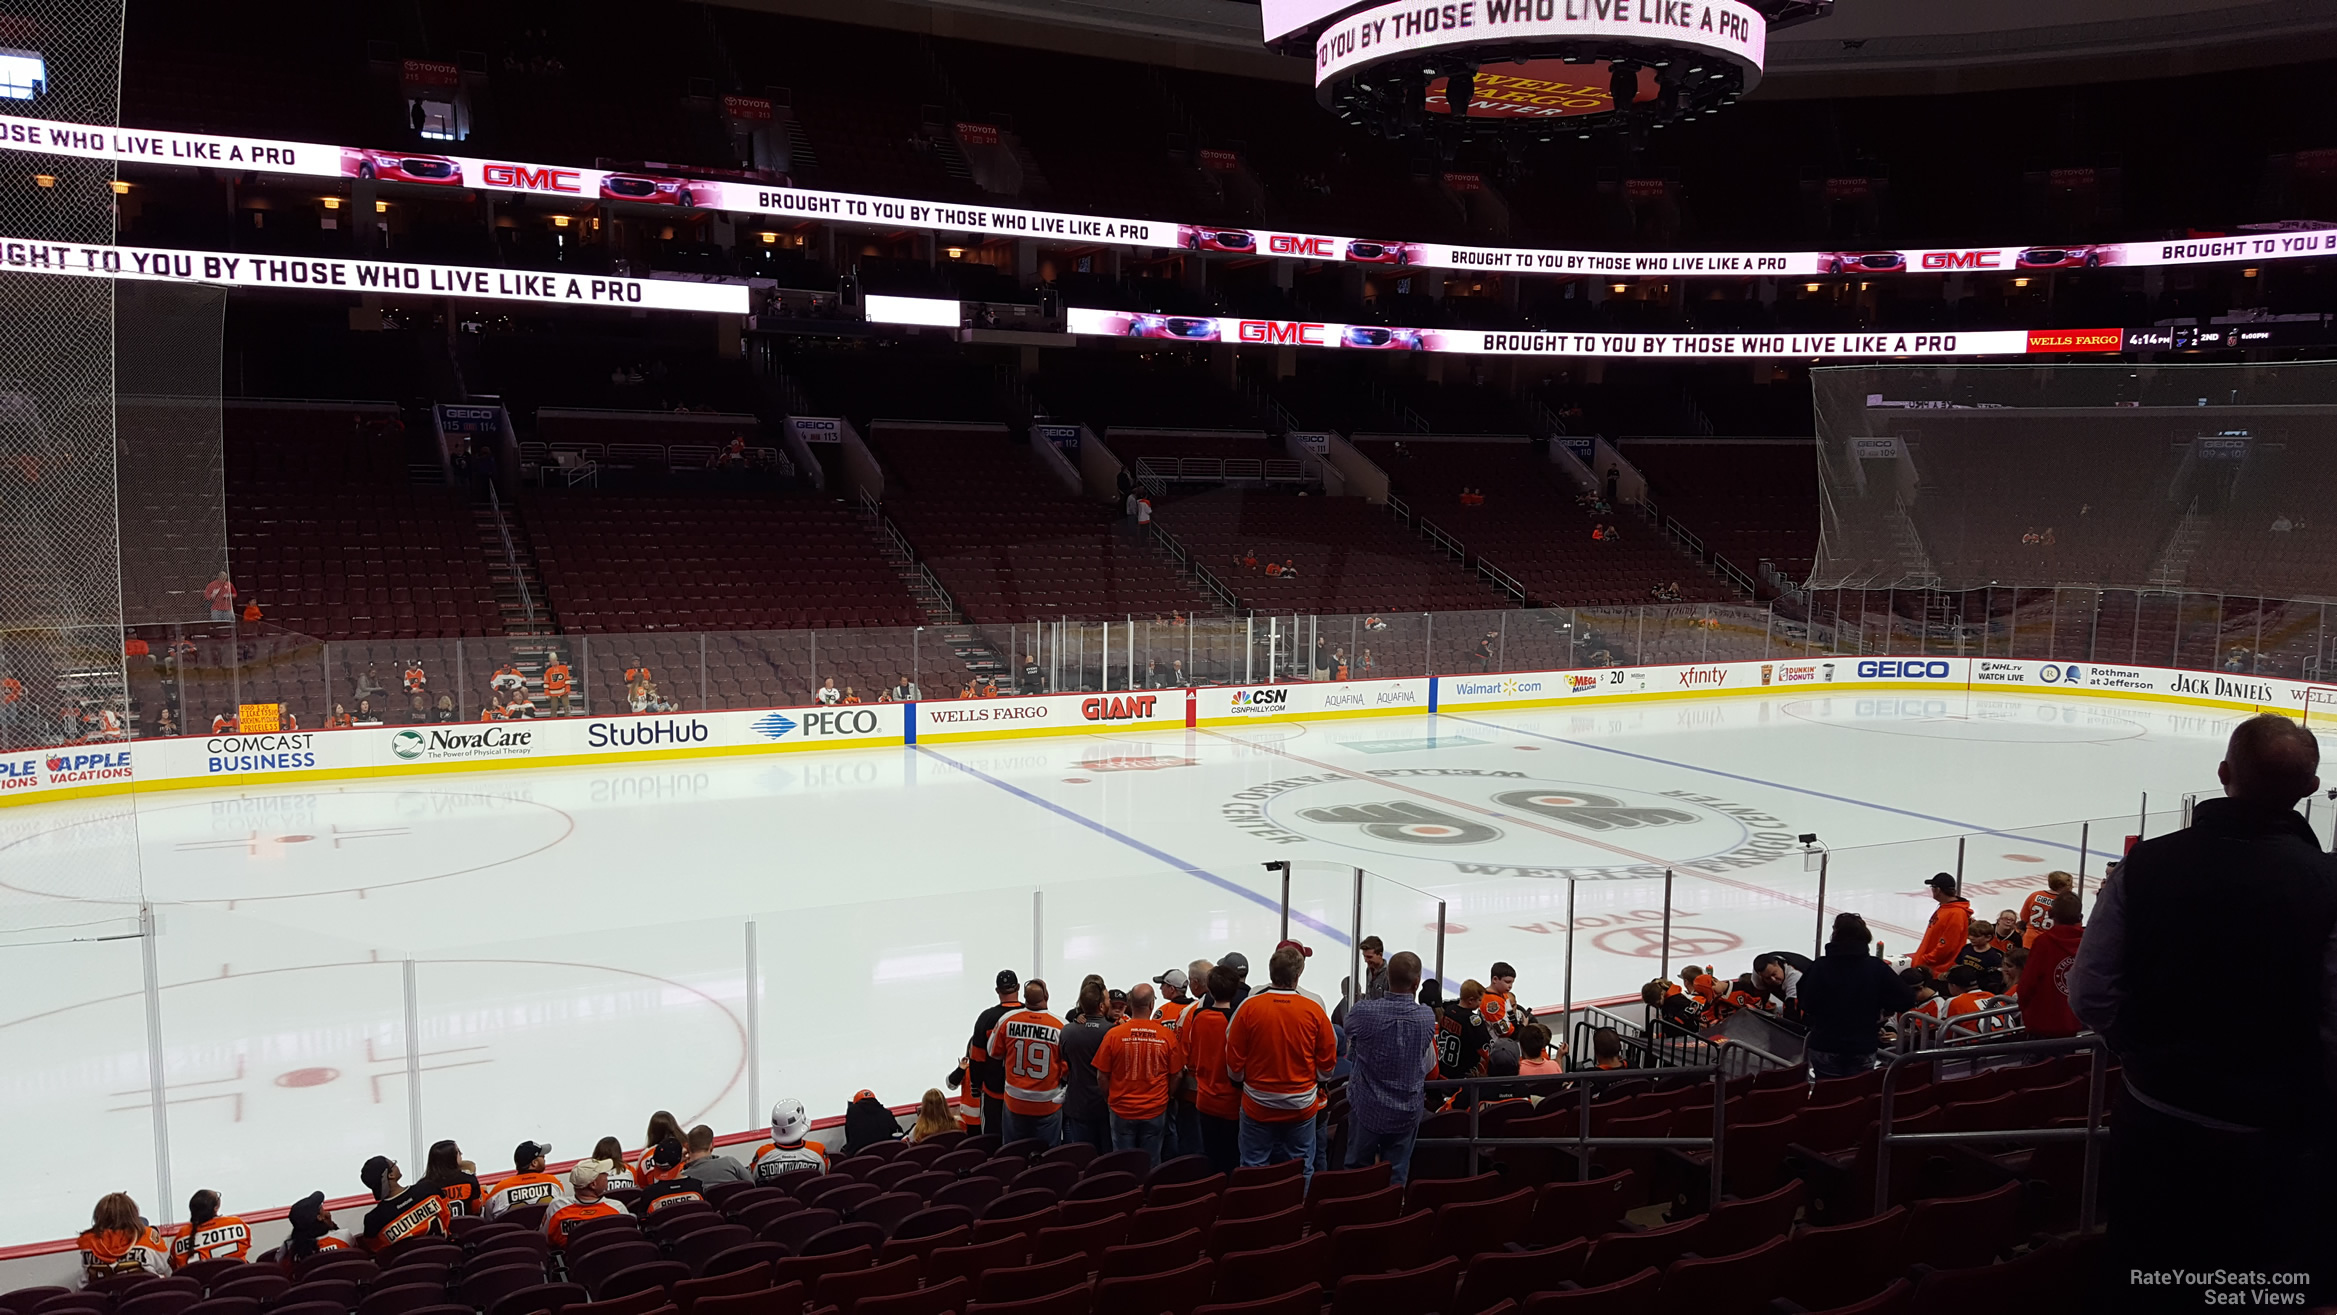 section 123, row 17 seat view  for hockey - wells fargo center